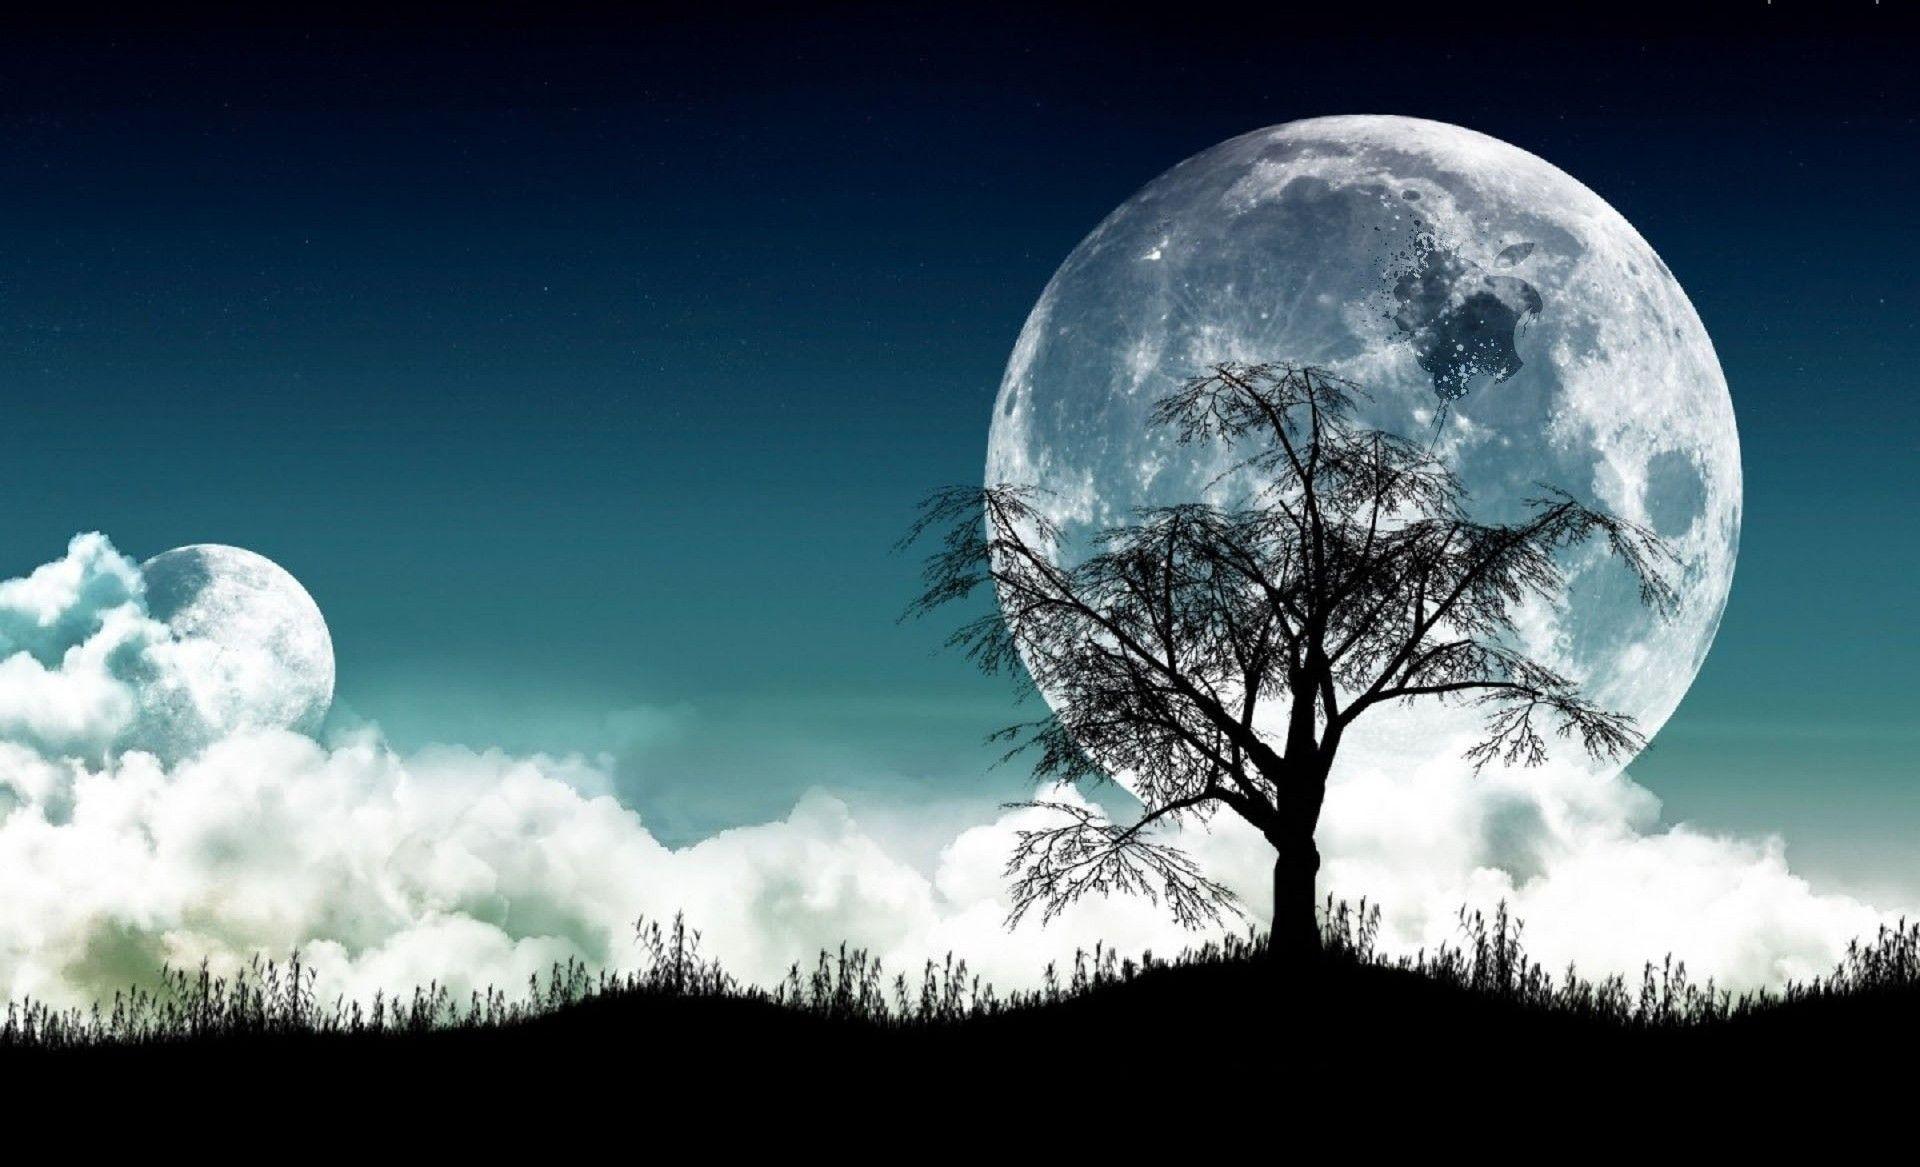 Sky: Sky Beautiful Nature Moon Background HD 16:9 High Definition